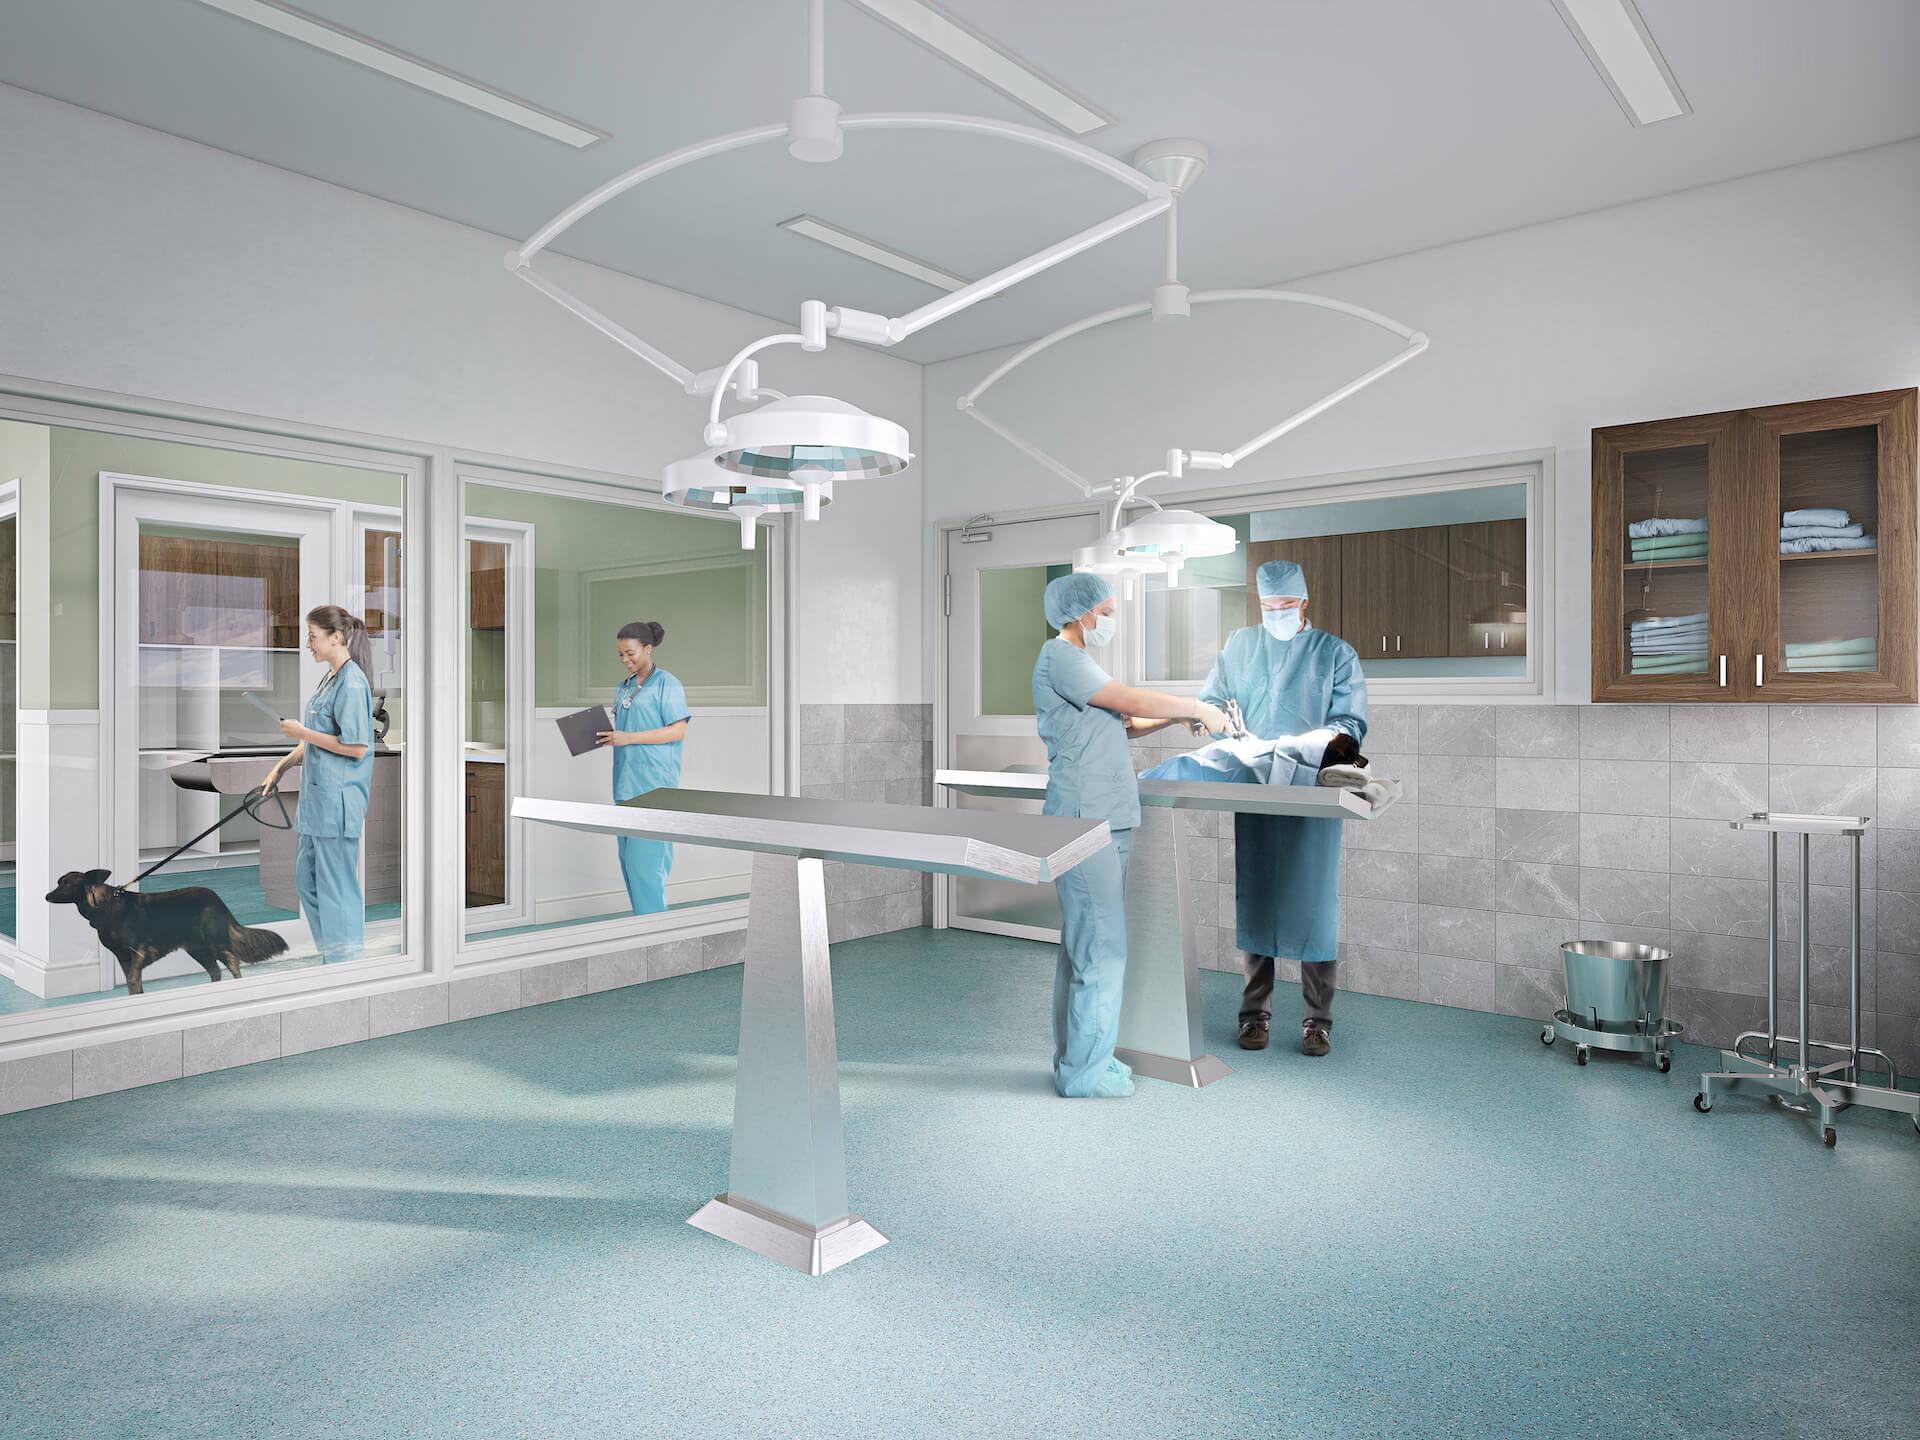 Interior Building Rendering of the Surgery Room After Post-Production